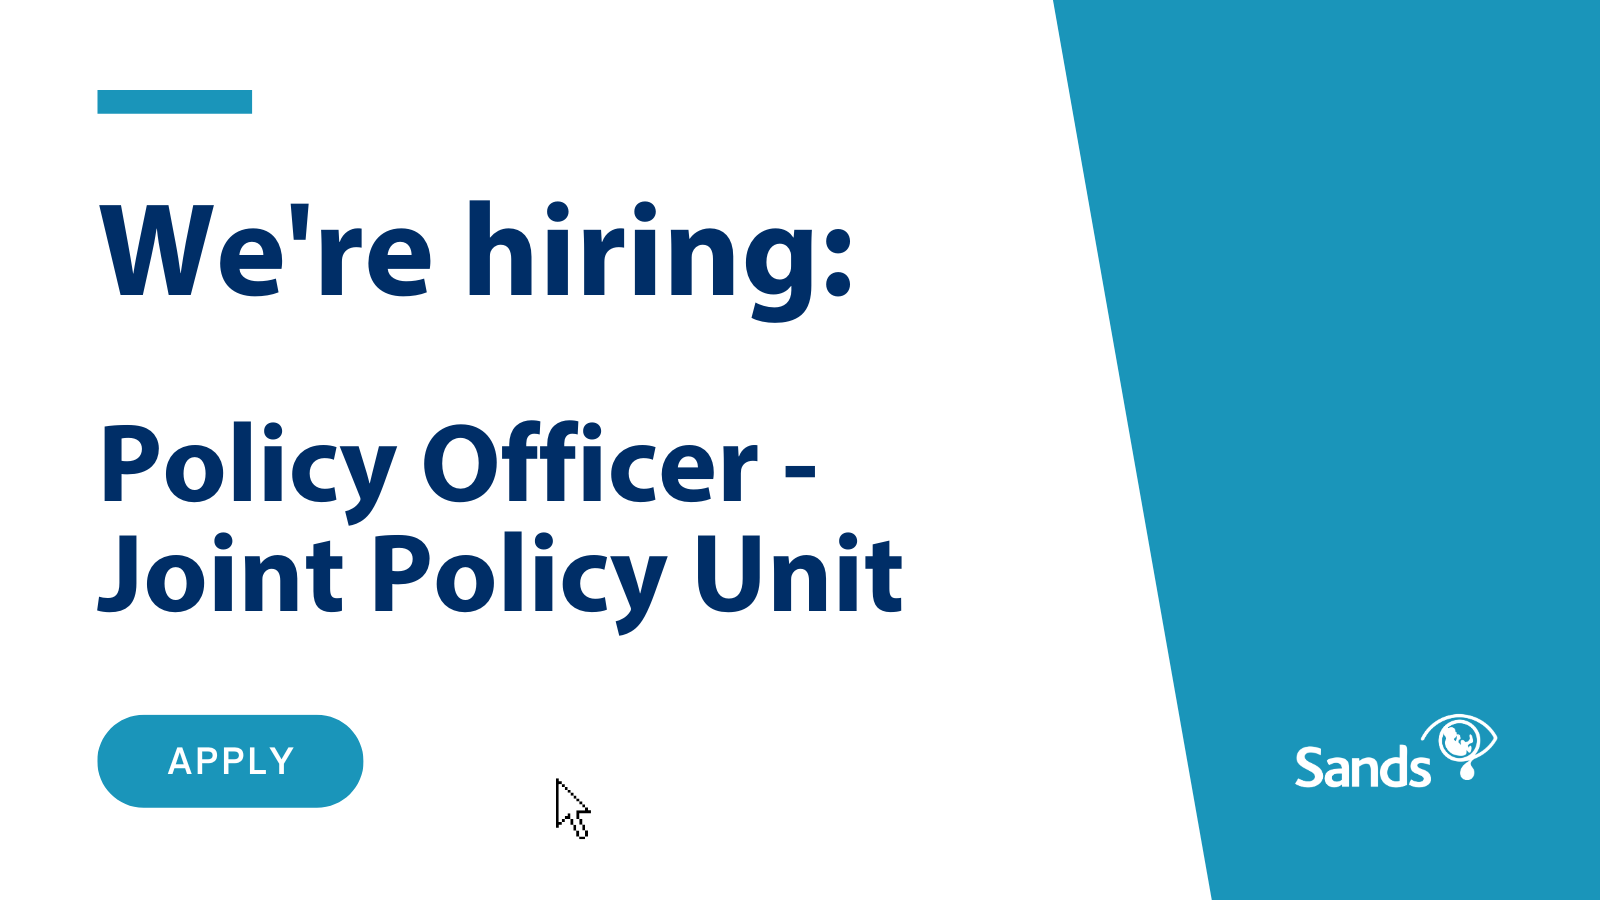 We are hiring Policy Officer - Joint Policy Unit